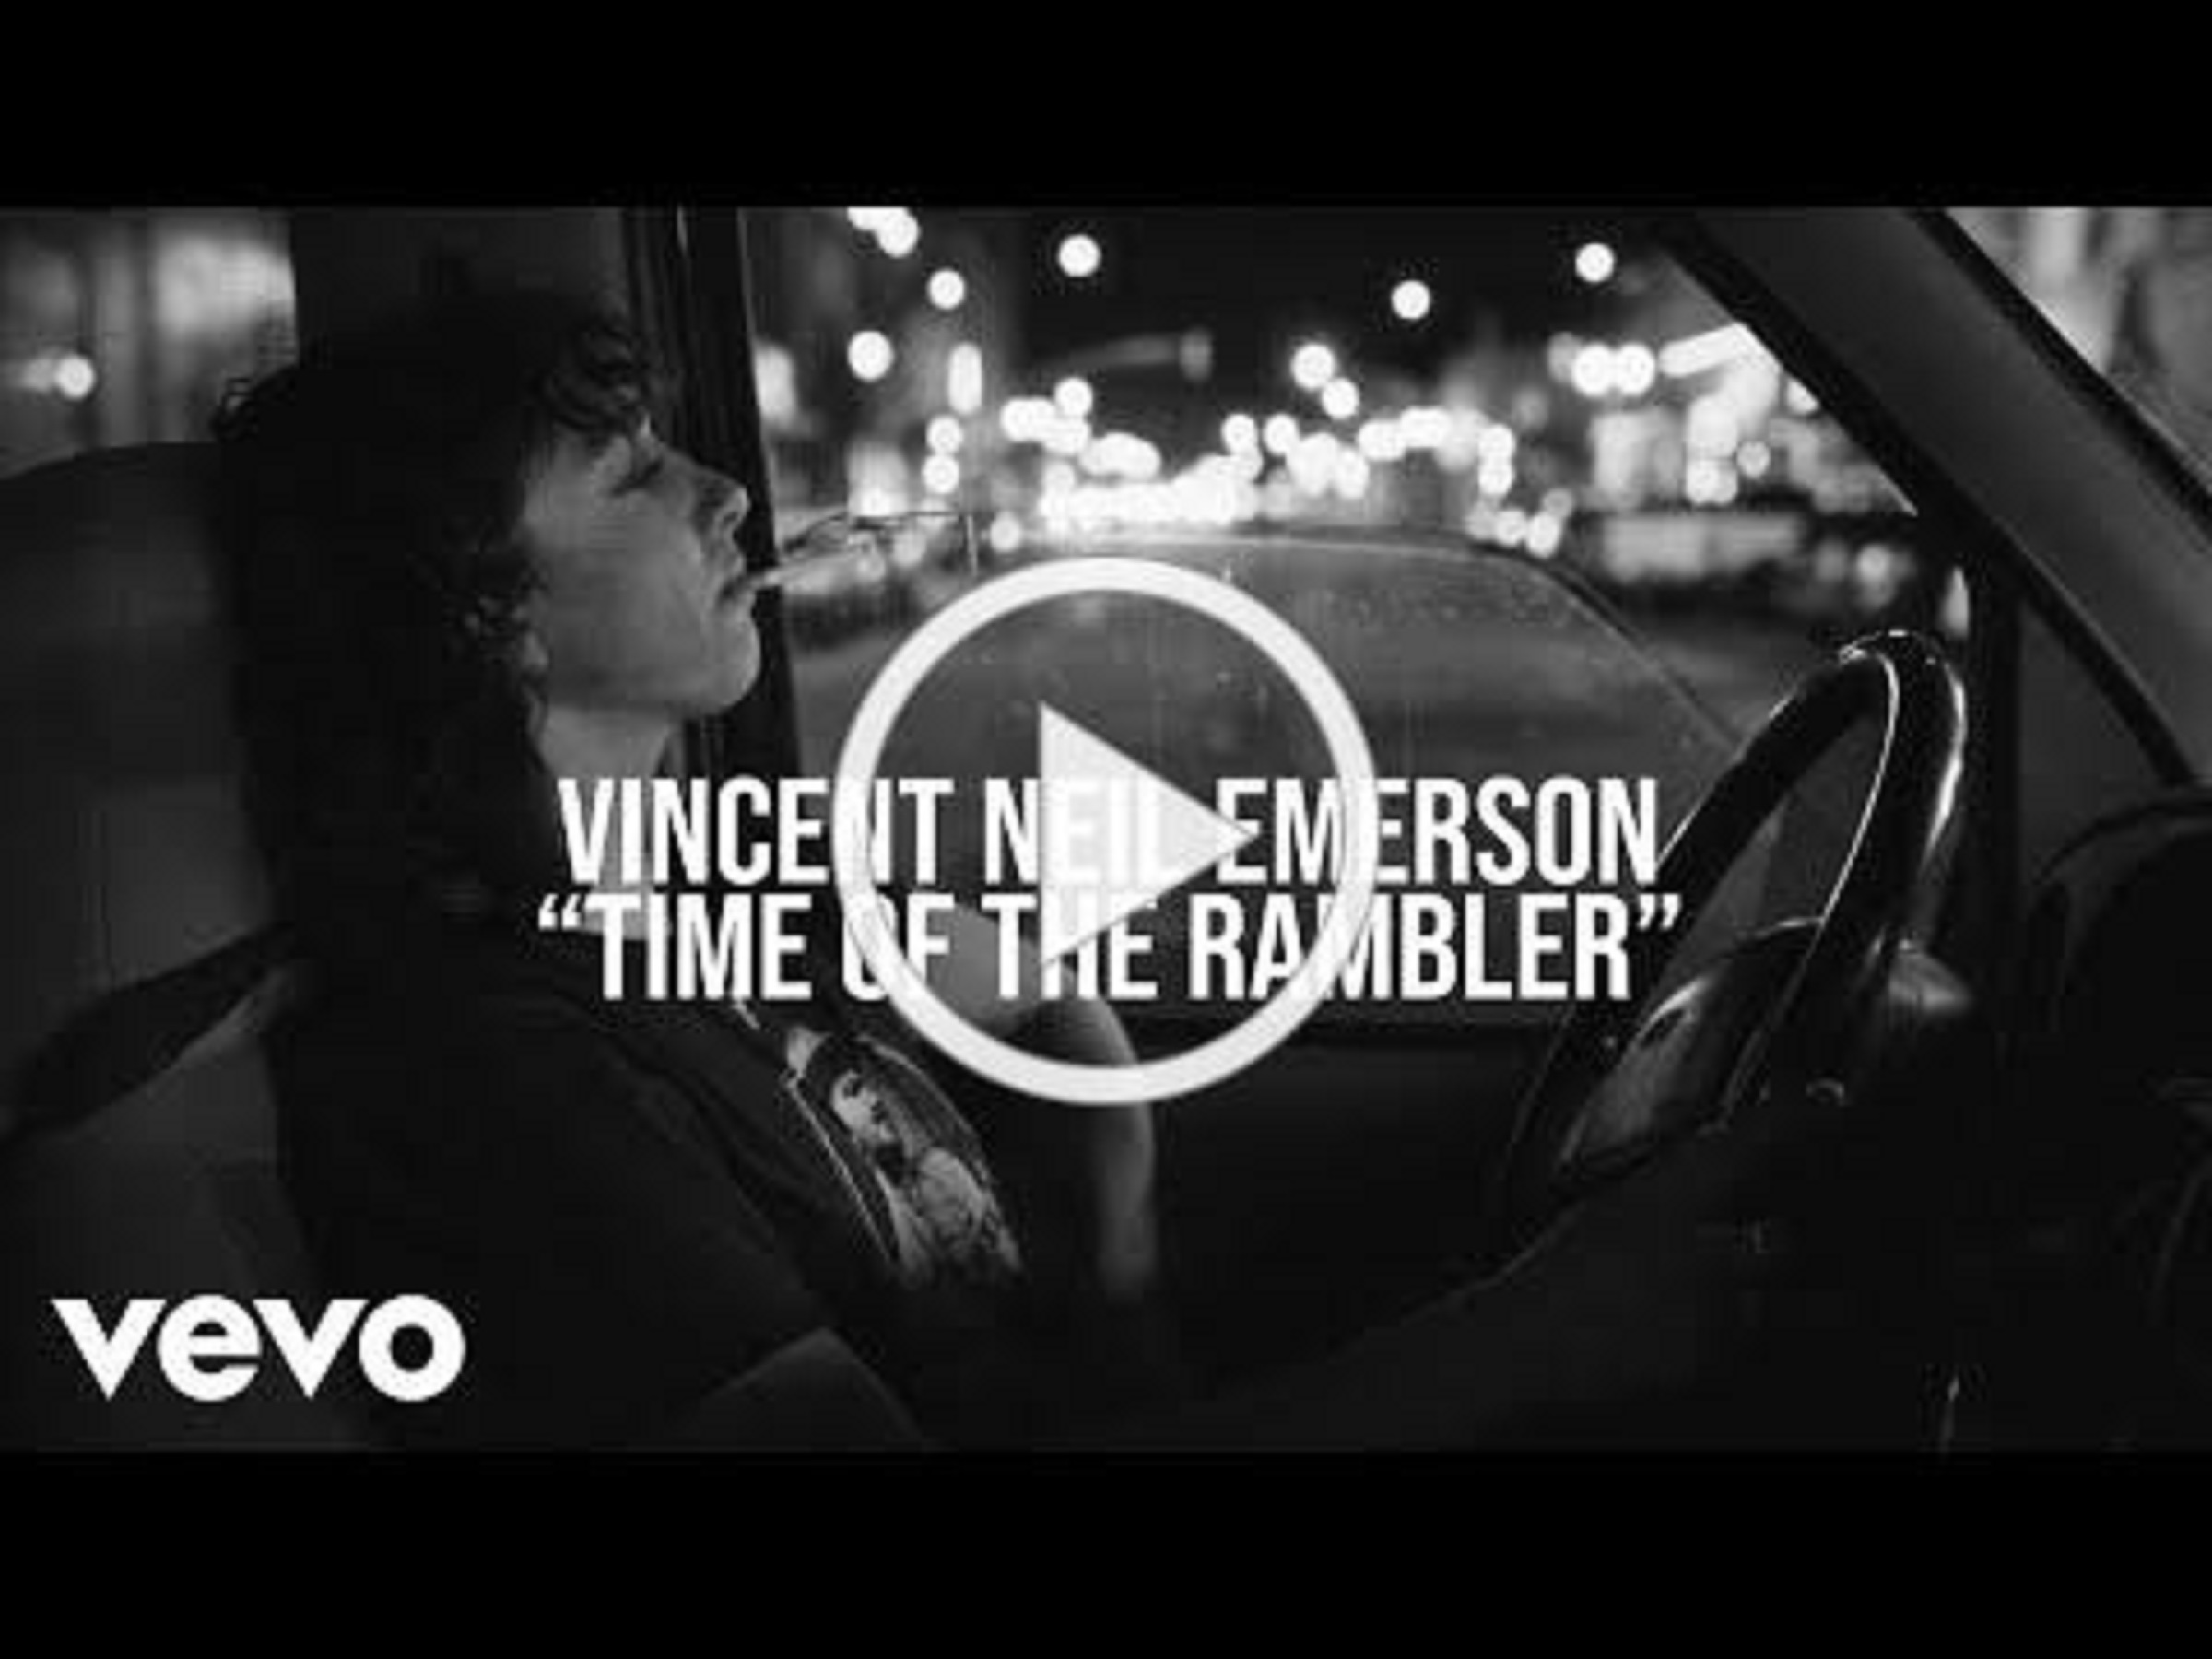 Hear Vincent Neil Emerson Reflect On His Early Touring Days On “Time Of The Rambler”